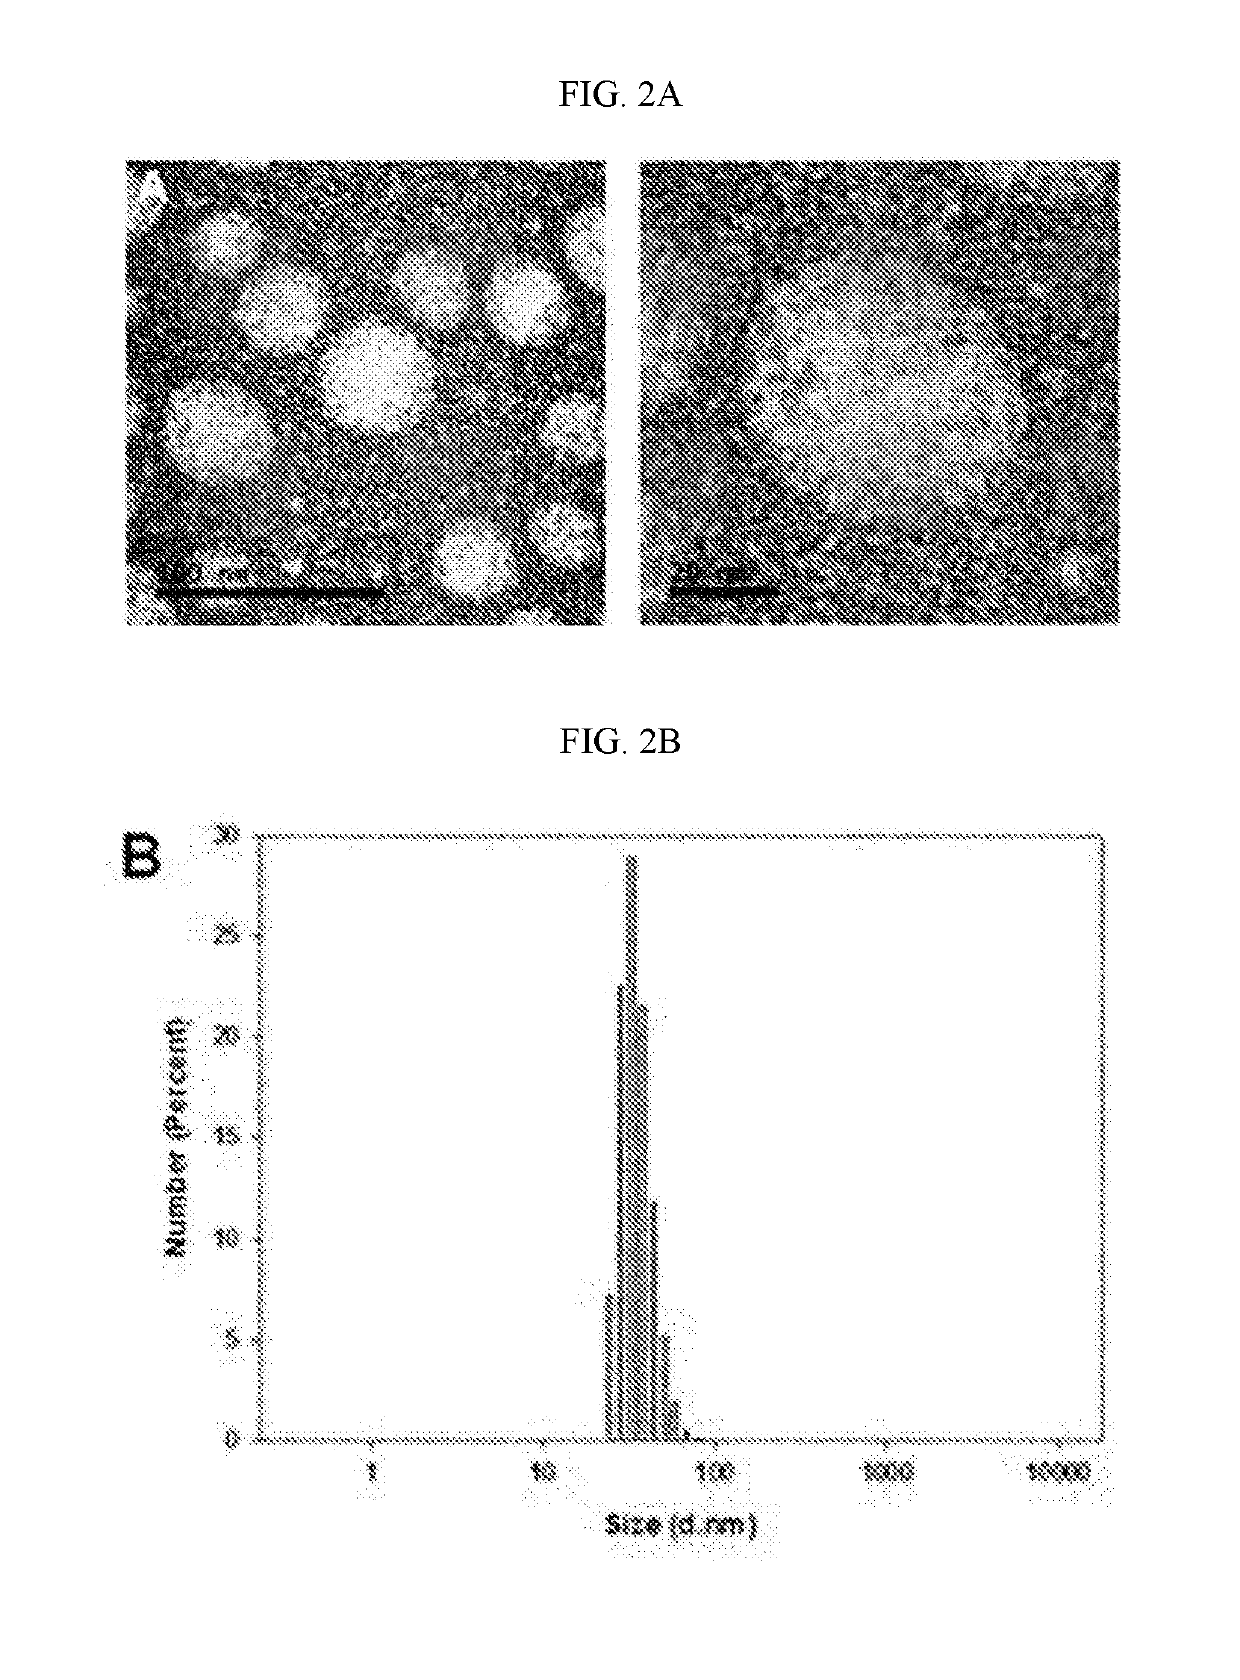 Self-assembled nanoparticle releasing soluble microneedle structure and preparation method therefor